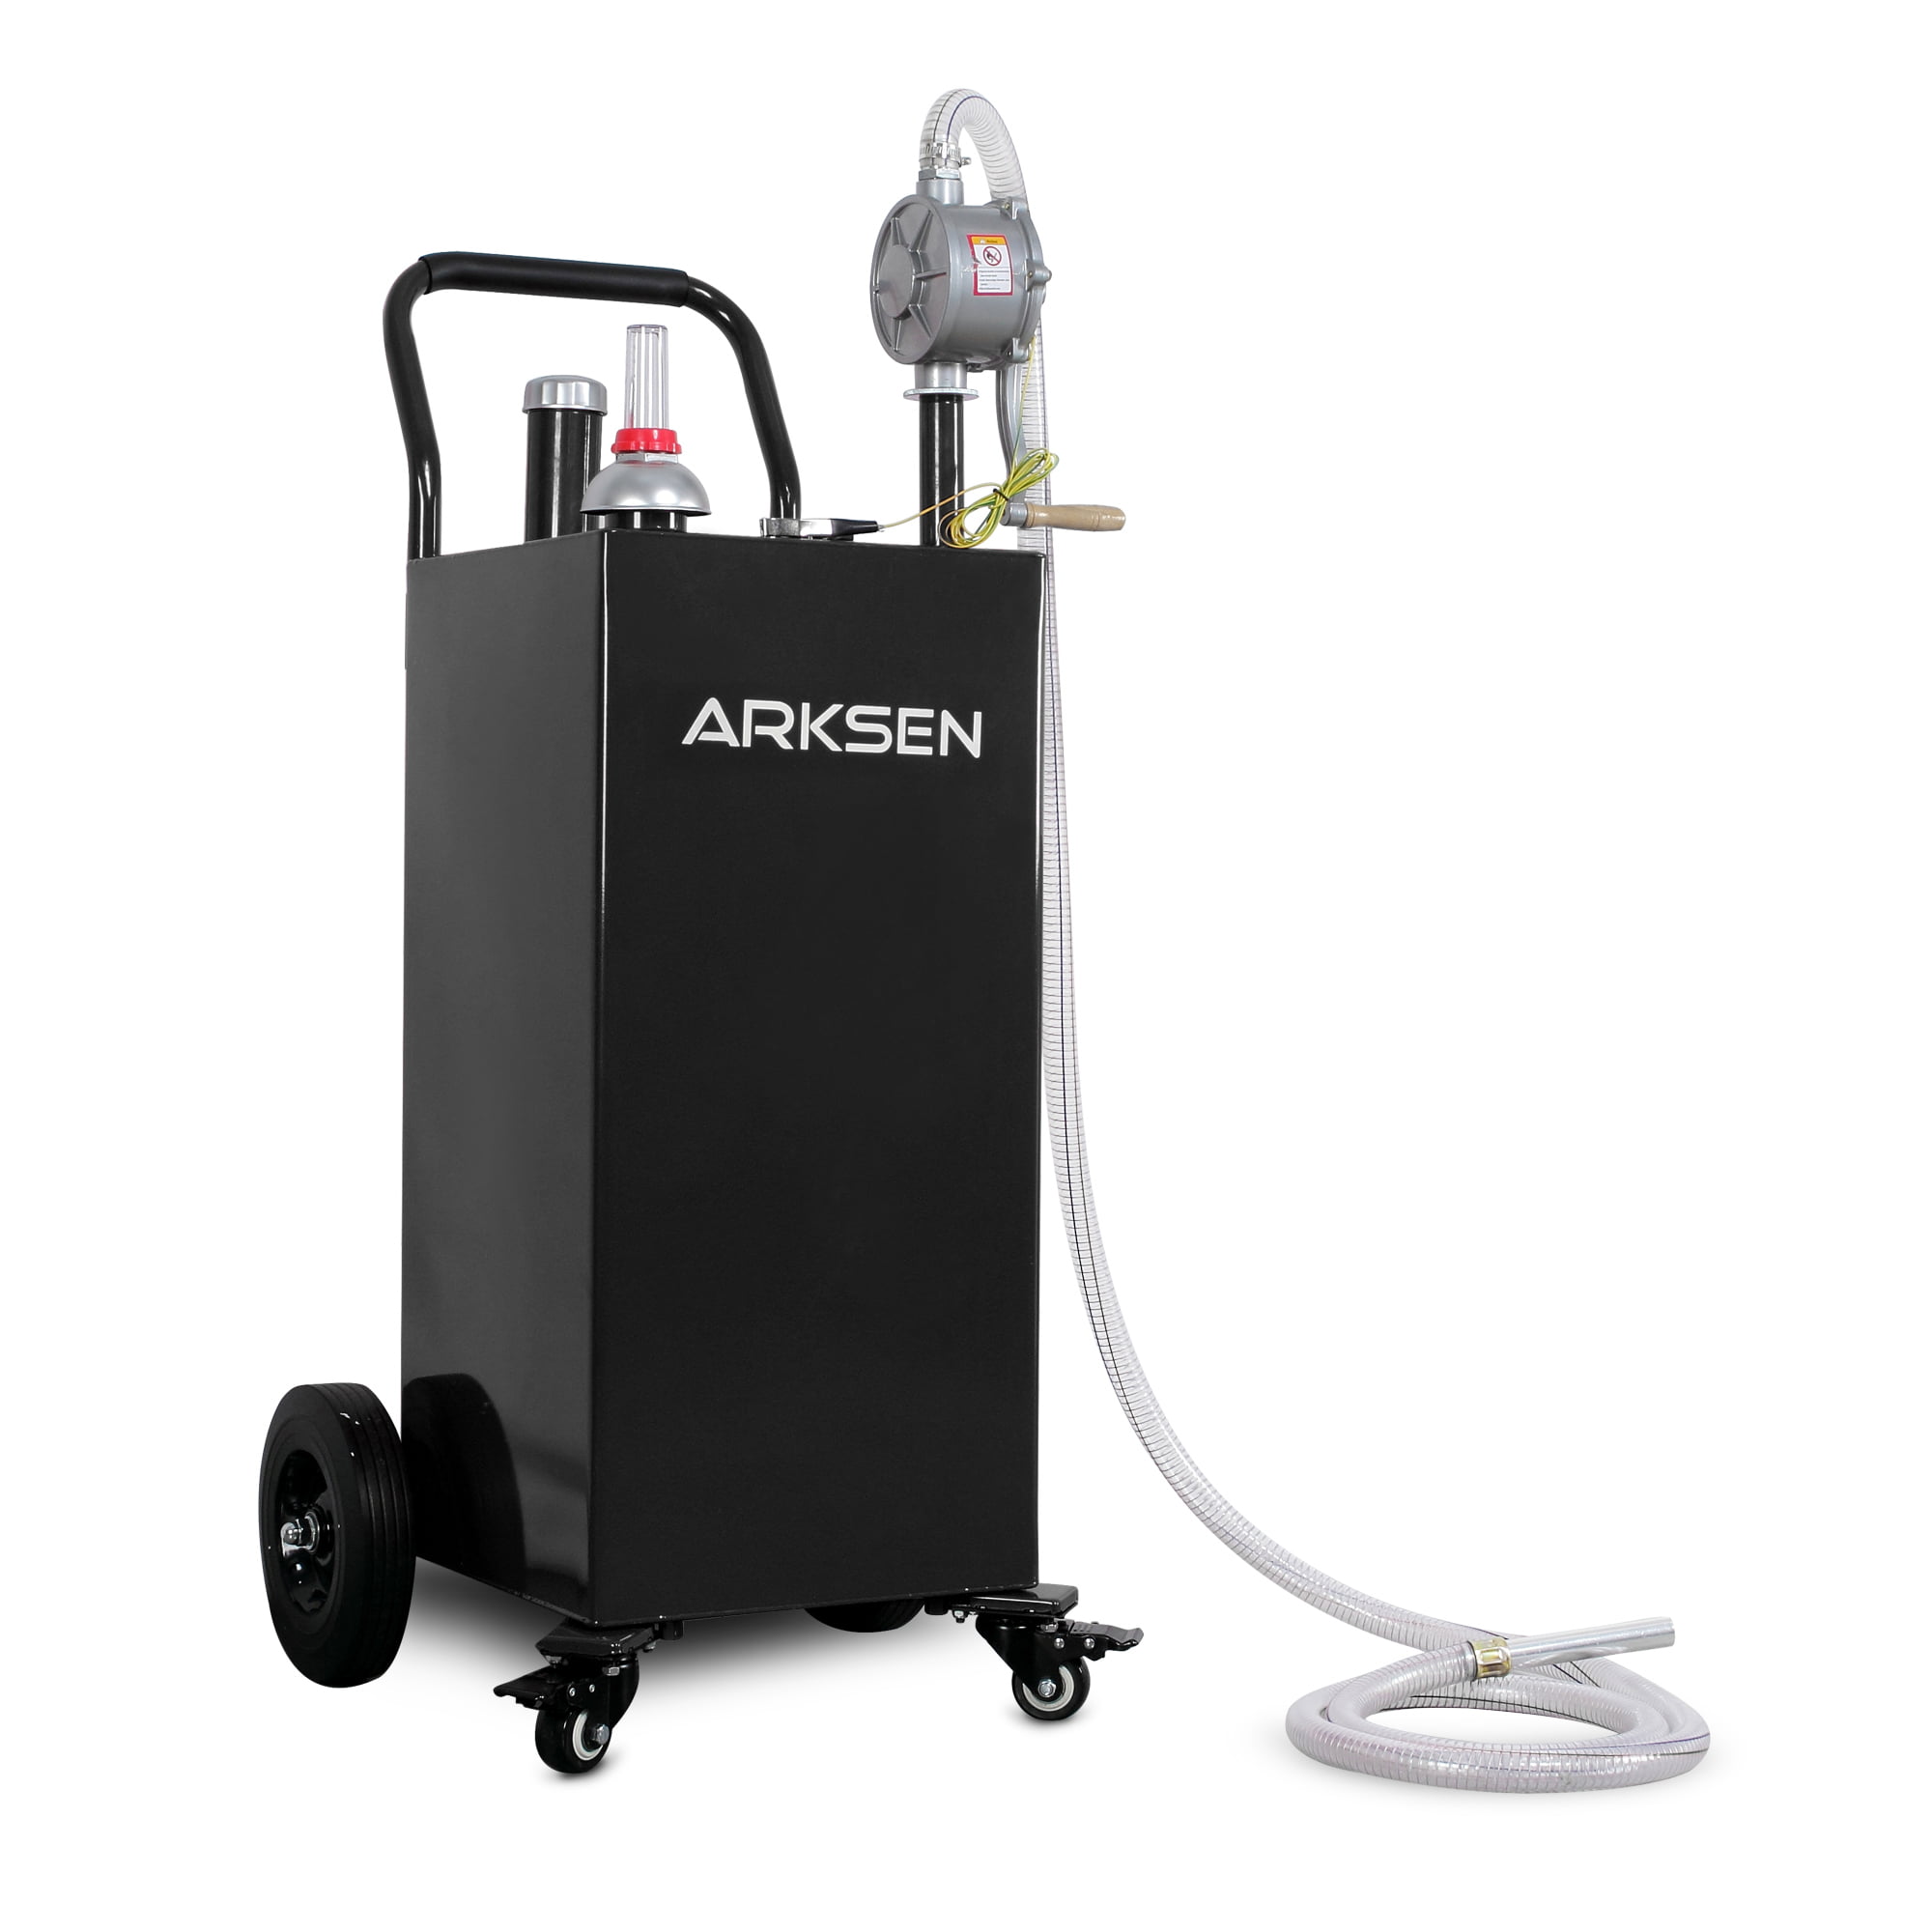 Black Arksen 35 Gallon Portable Gas Caddy Fuel Storage Tank Large Gasoline Diesel Can Hand Siphon Pump Rolling Flat-Free Solid Rubber Wheels Boat ATV Car Motorcycle 